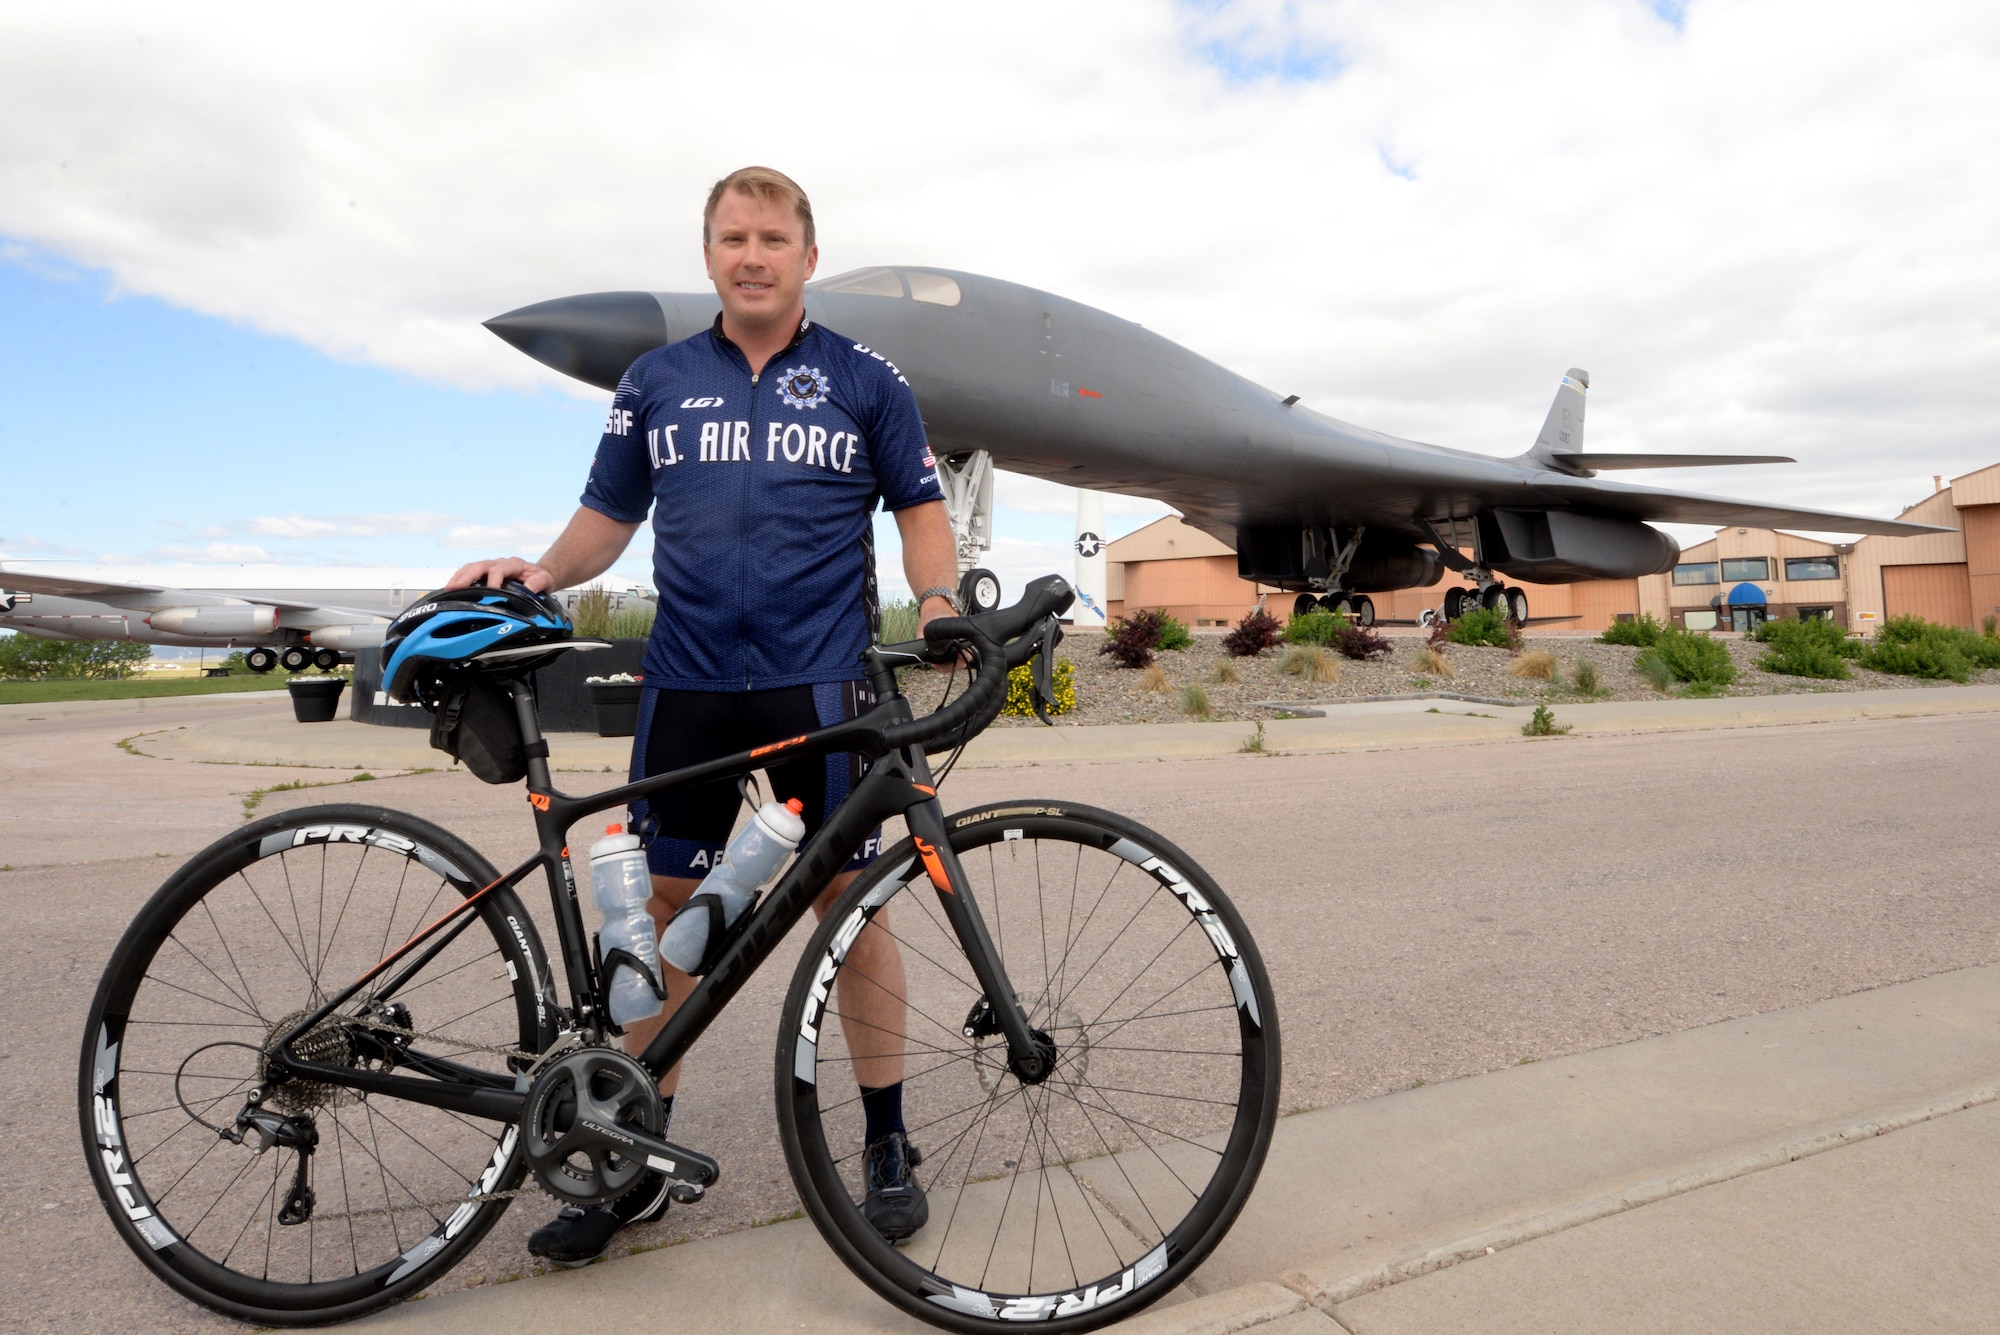 Maj. Anthony Bares, the director of wing inspections assigned to the 28th Bomb Wing Inspector General office, poses with his bike at the South Dakota Air and Space Museum, Box Elder, S.D., June 23, 2017. Bares currently leads the Dakota Regional Air Force Cycling Team, which includes six Airmen assigned to Ellsworth, five Airmen from Minot AFB, N.D., two Air Force reservists and two civilians. (U.S. Air Force photo by Staff Sgt. Hailey Staker)